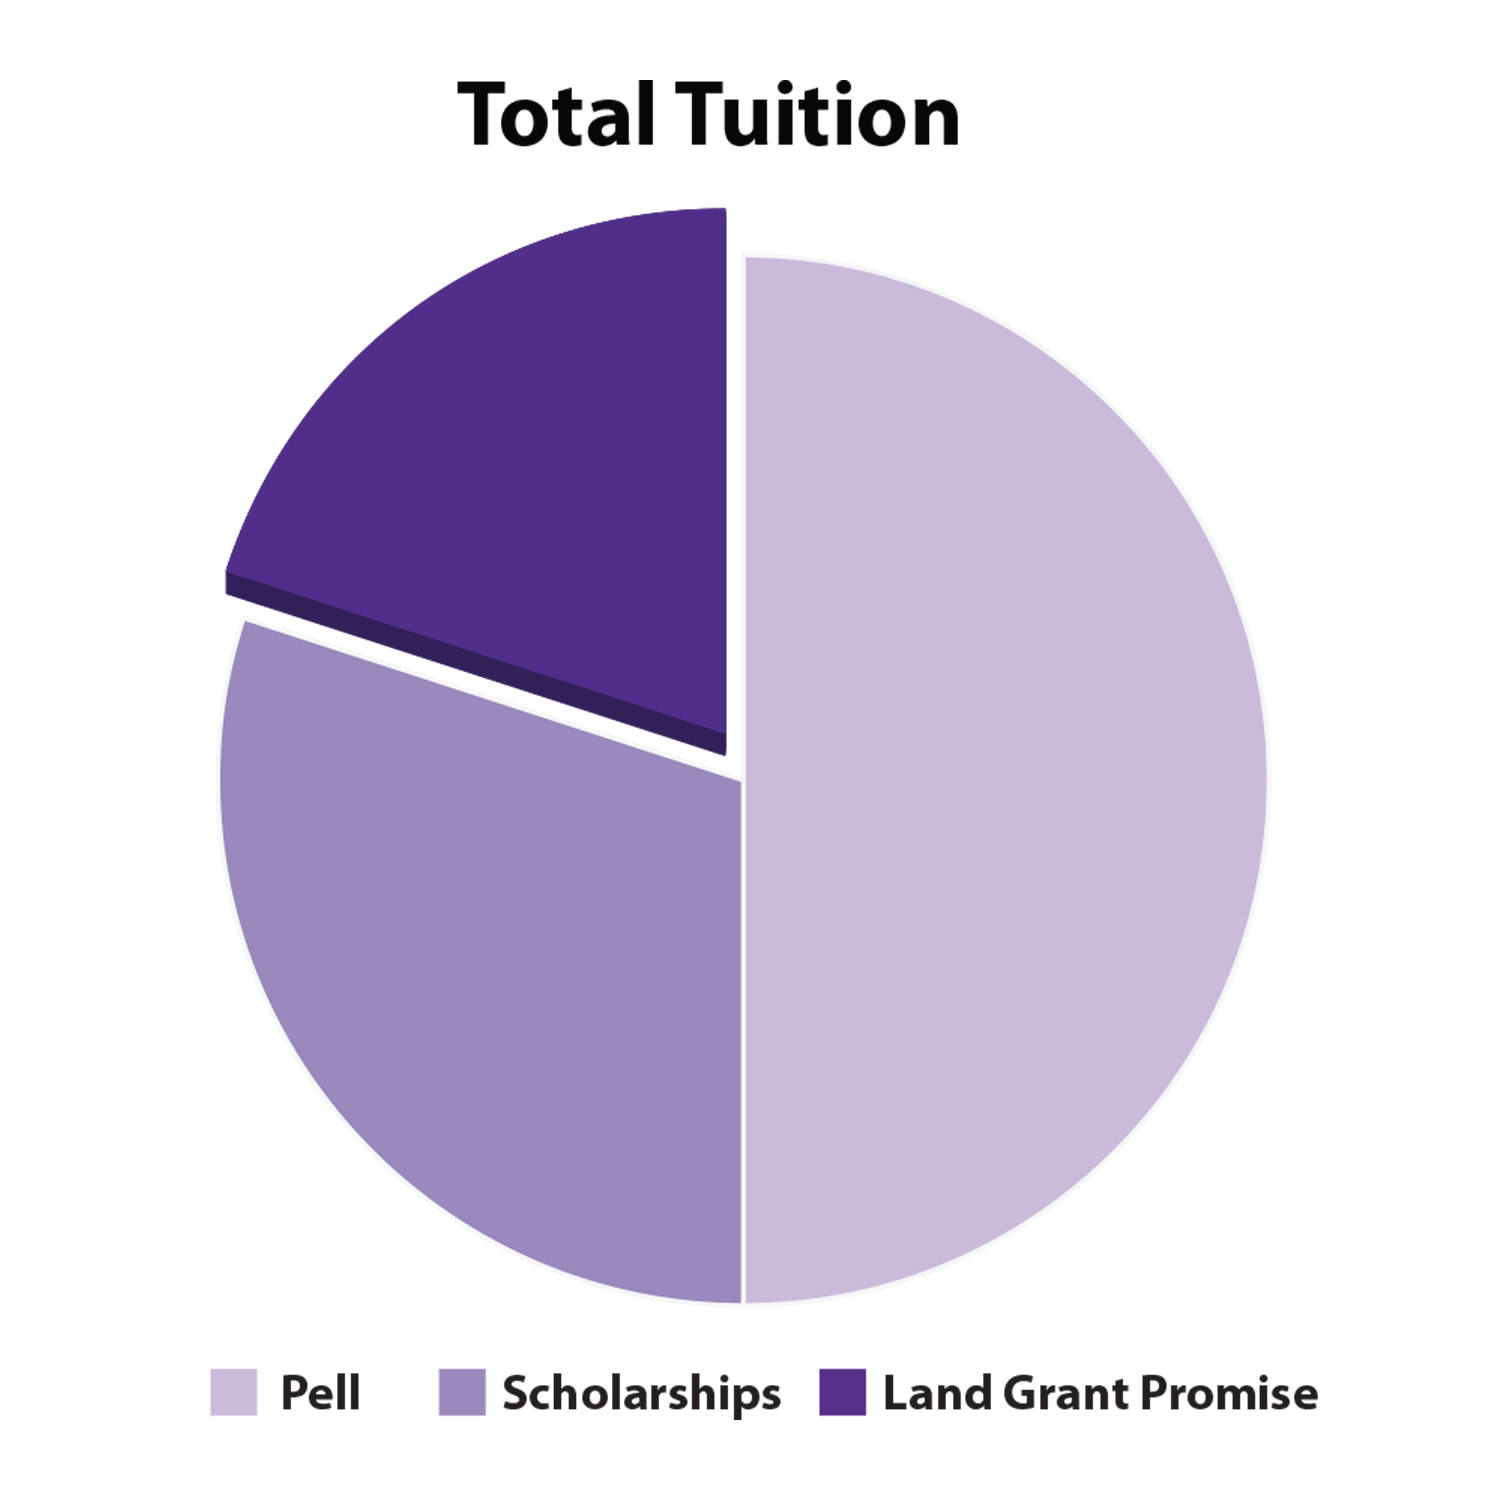 pie chart showing pell, scholarships, and the land grant promise as covering your tuition